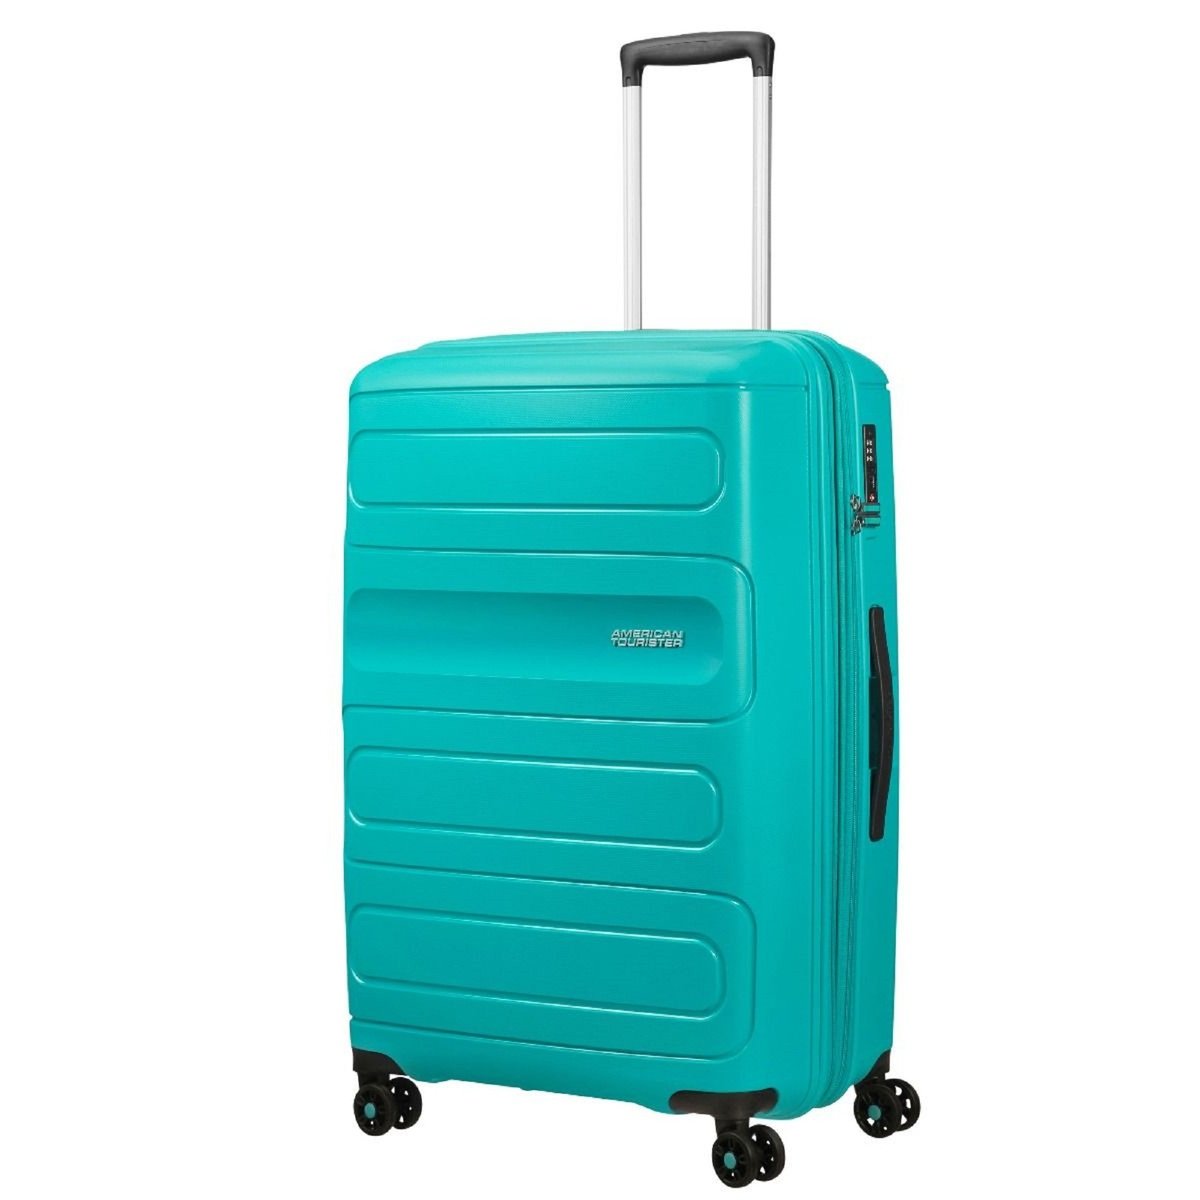 American Tourister 4 Wheel Hard Trolley, 55 cm, Assorted